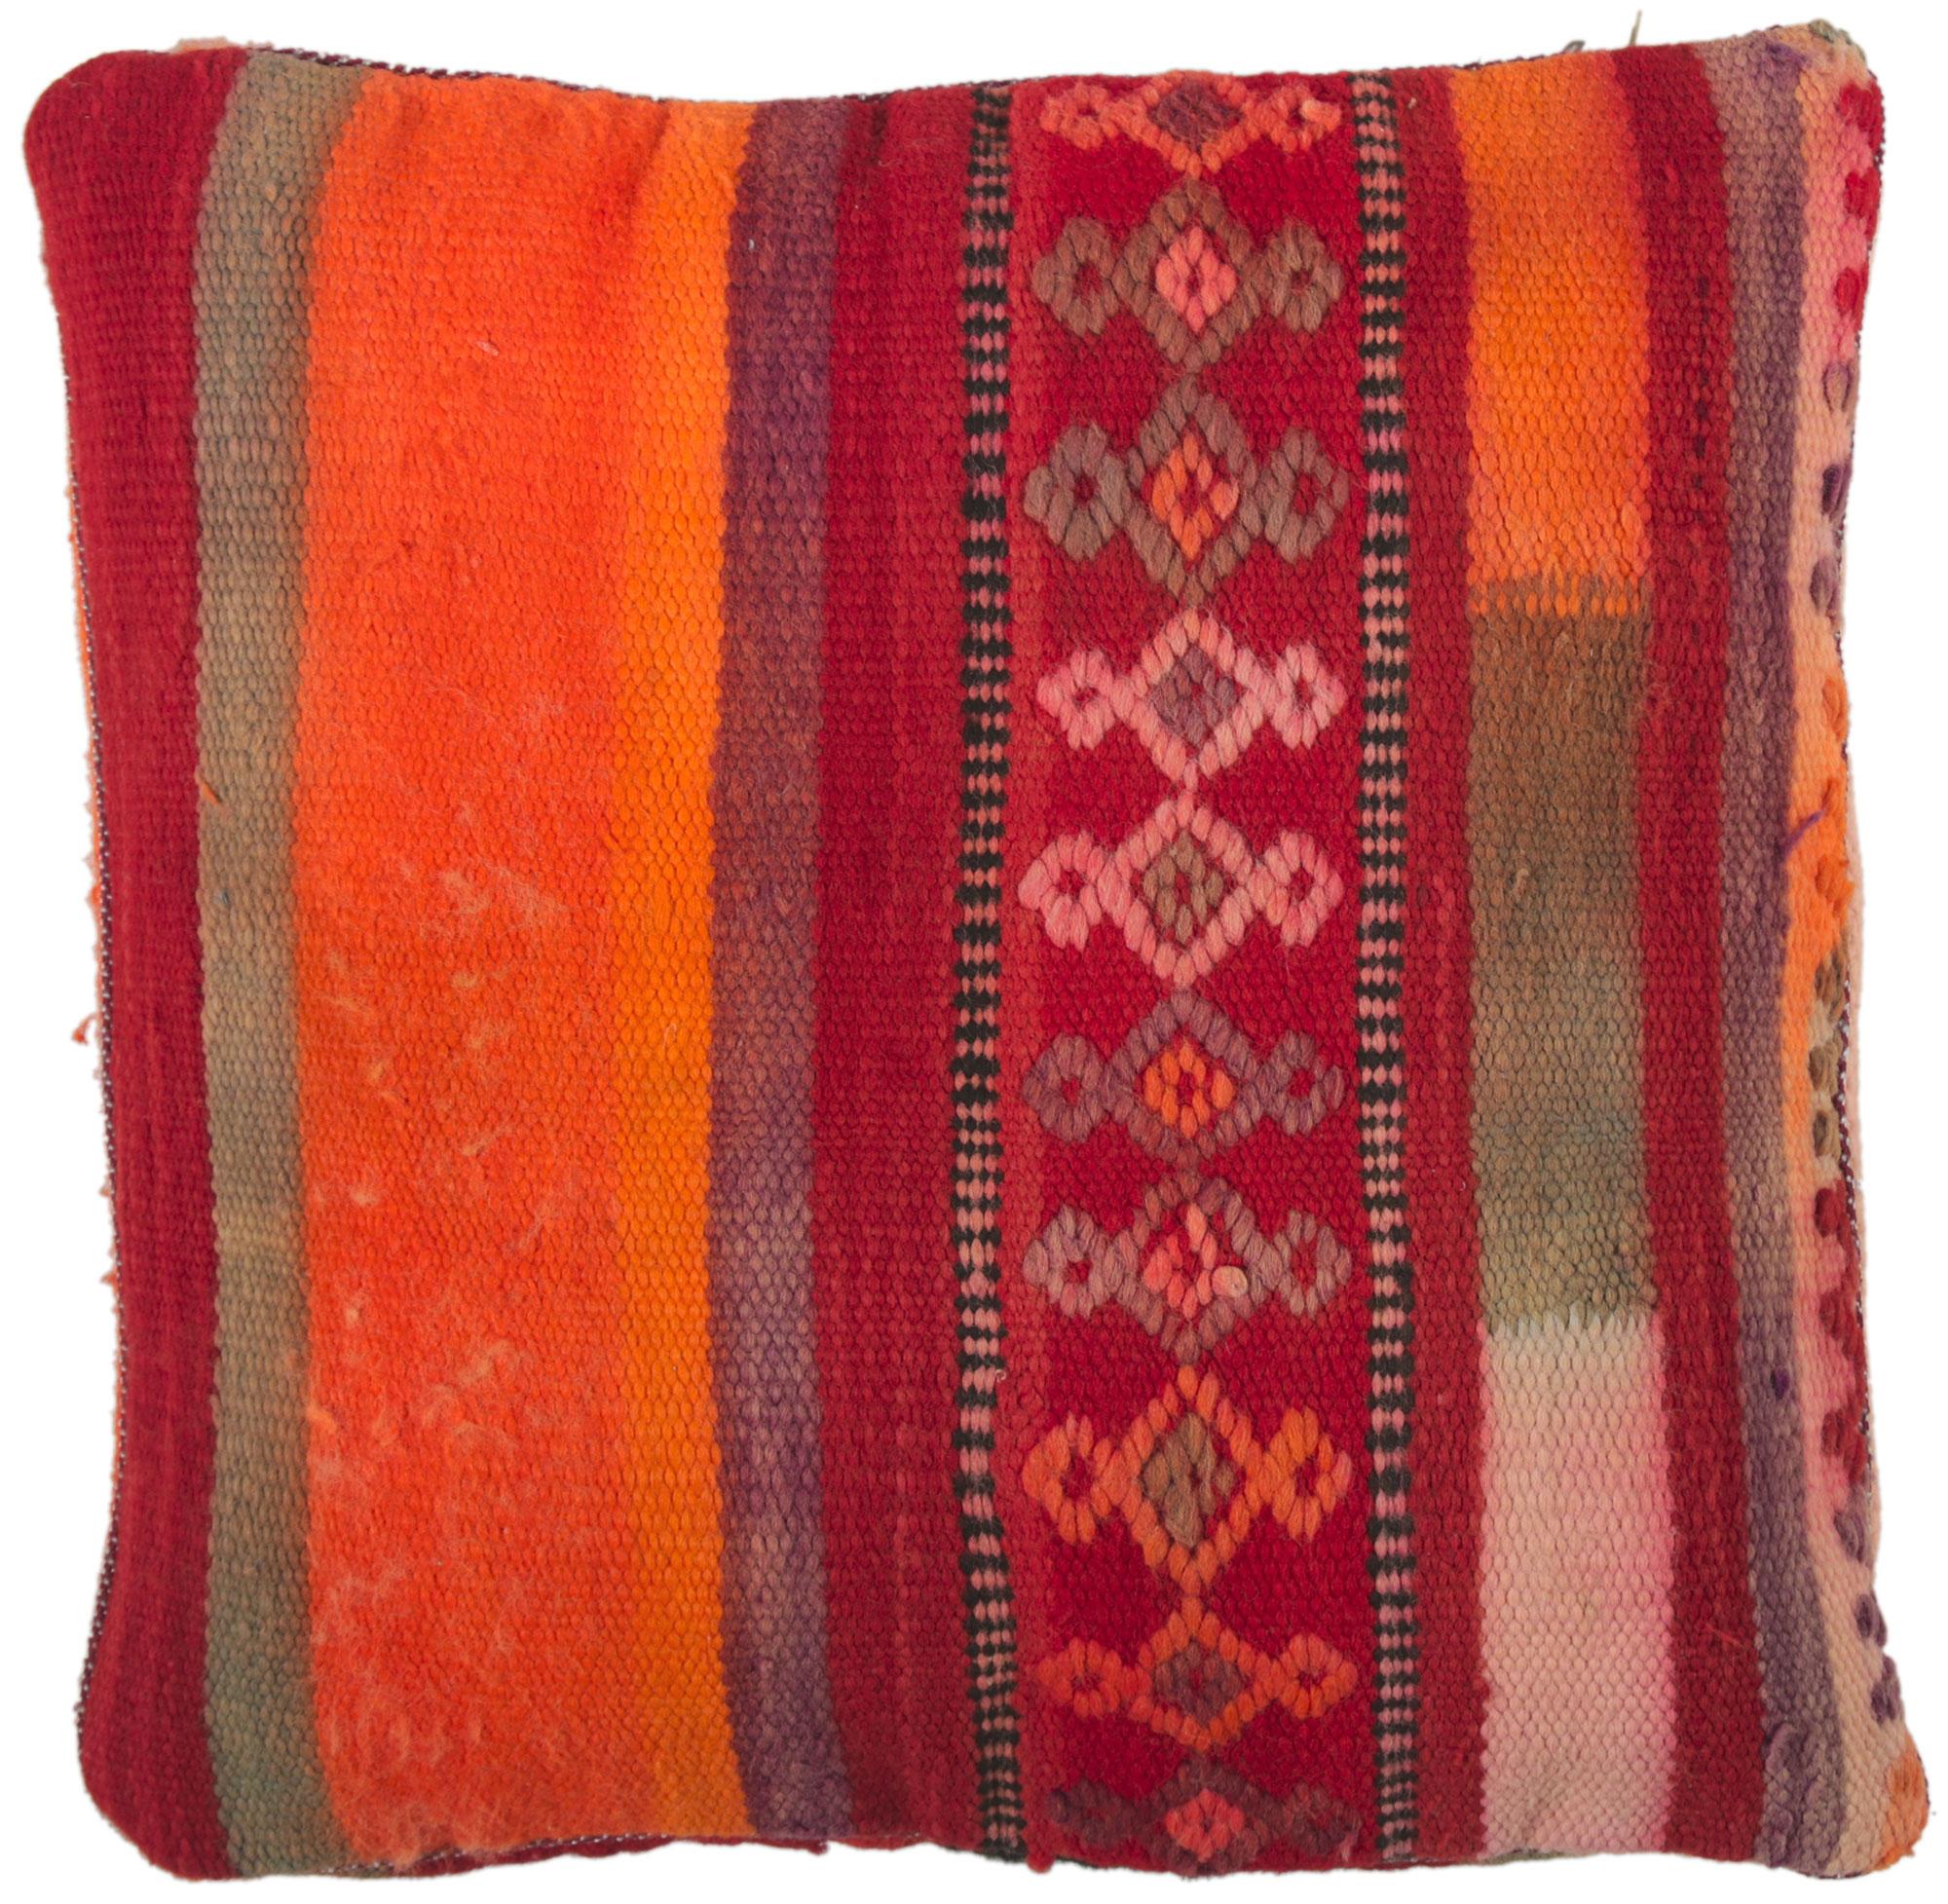 Vintage Moroccan Rug Pillow by Berber Tribes of Morocco In Distressed Condition For Sale In Dallas, TX